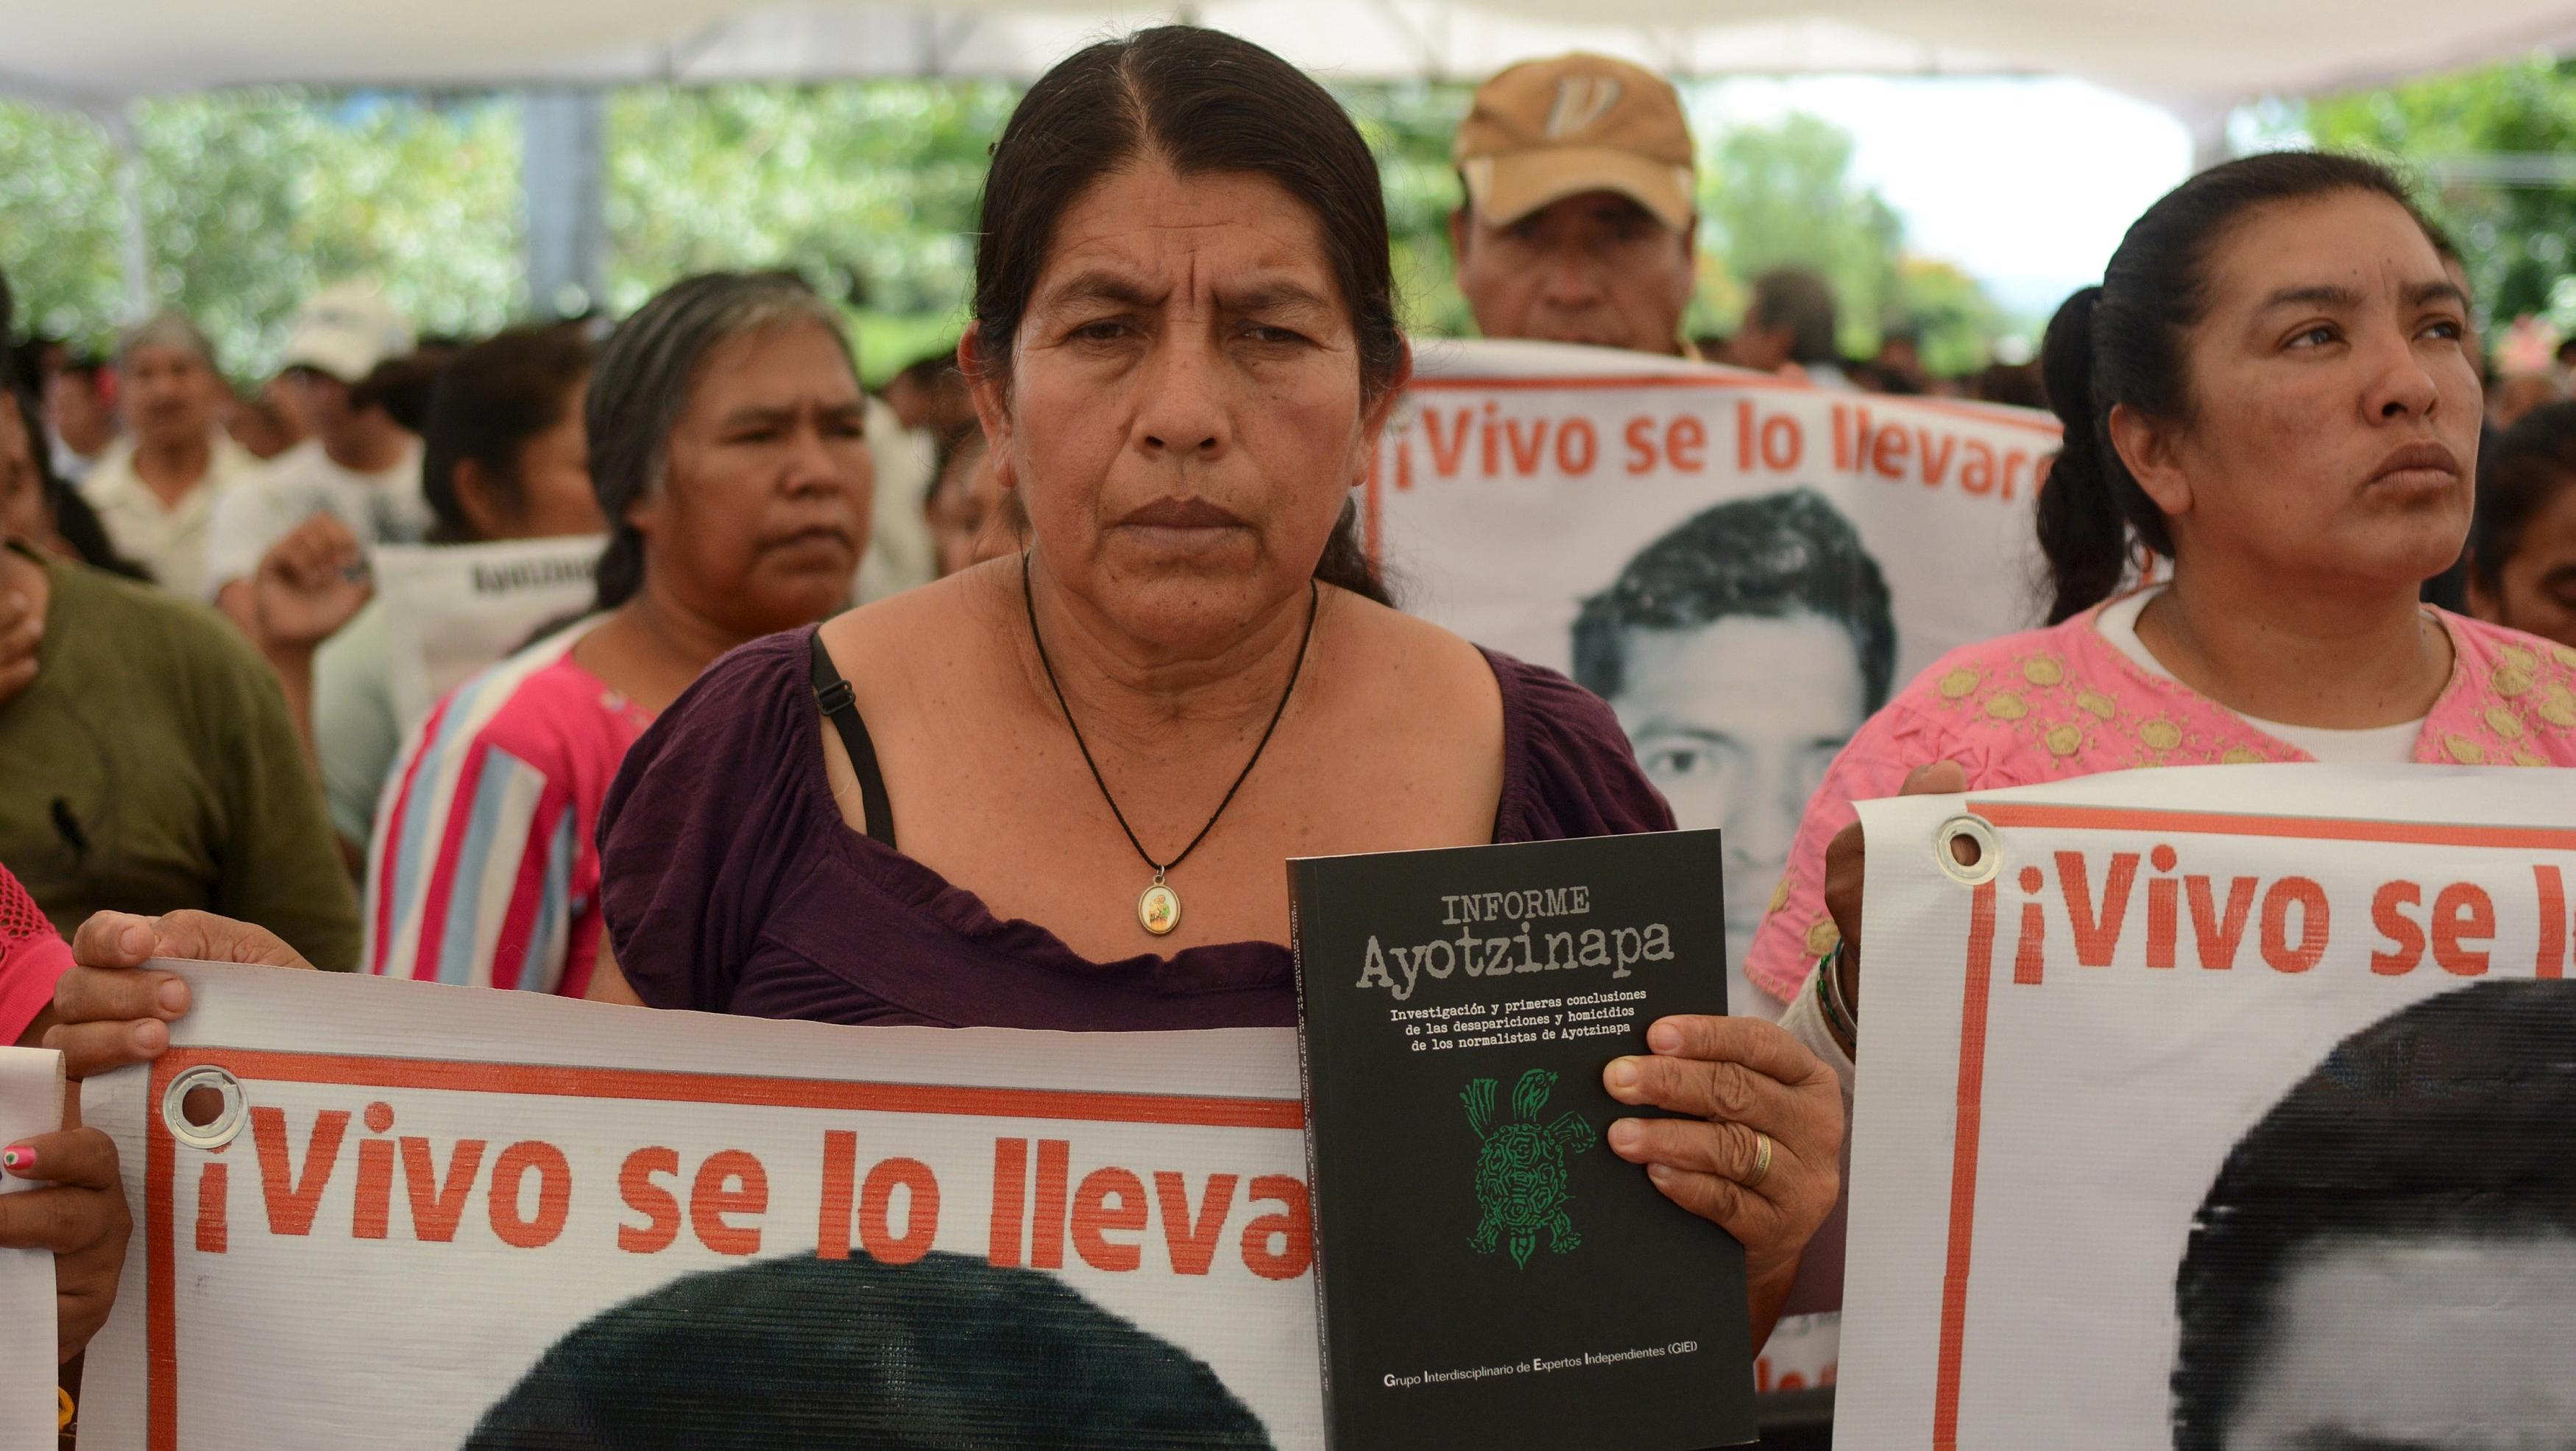 The relative of a missing student holds a copy of the report of the Inter-American Human Rights Commission (CIDH), during a meeting with members of the CIDH at the Ayotzinapa teachers' training college, in Tixtla, Mexico, September 8, 2015.